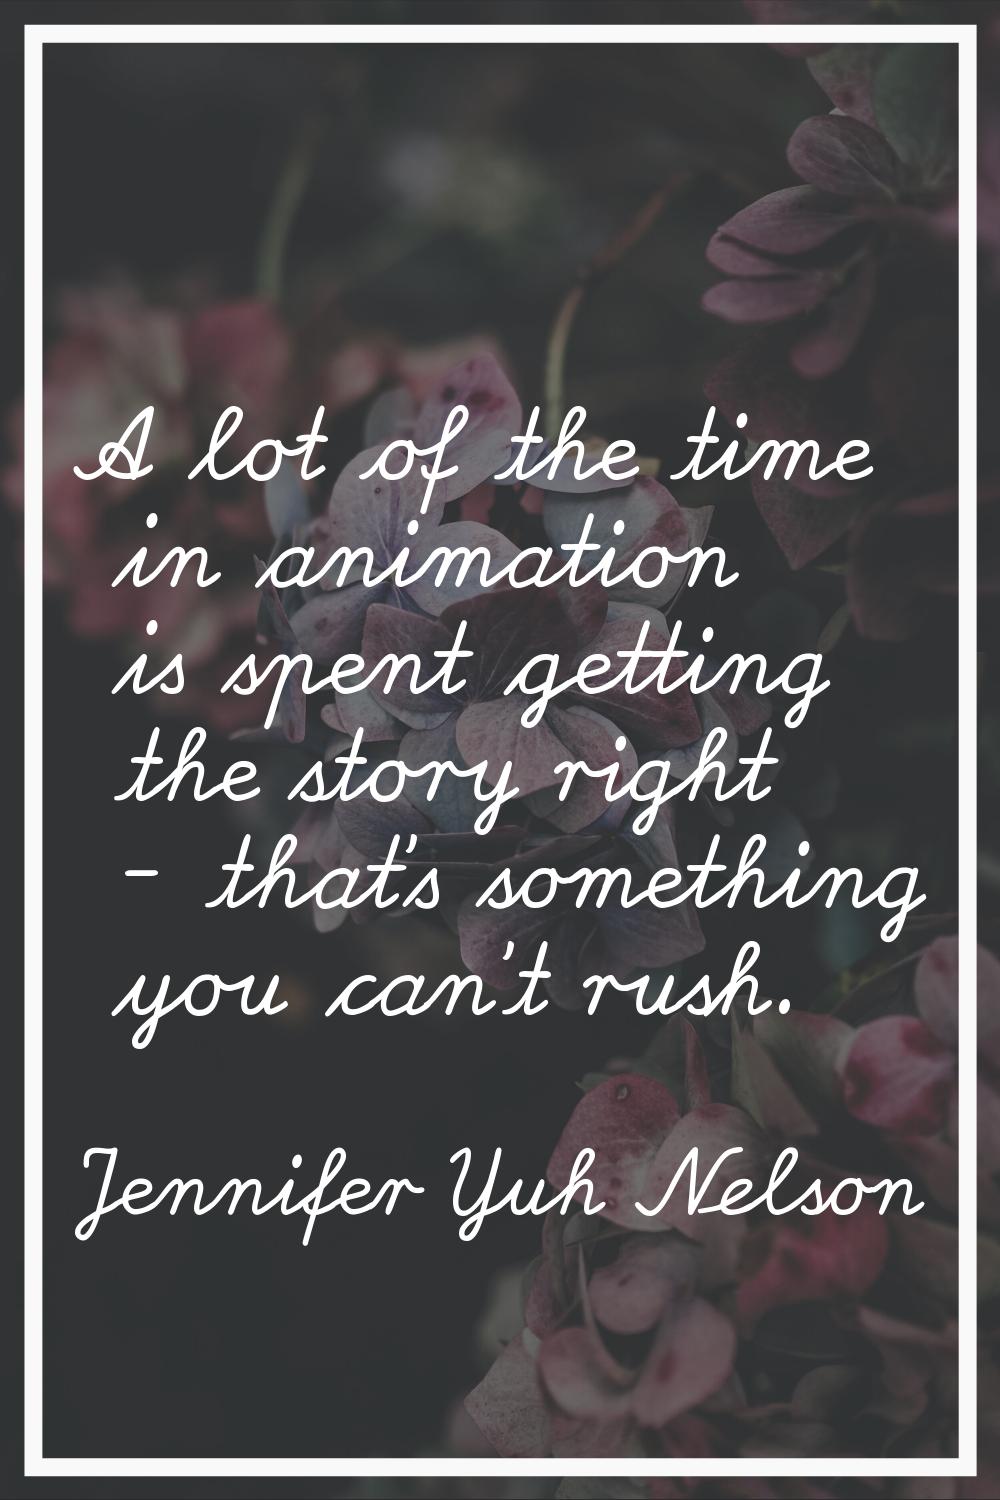 A lot of the time in animation is spent getting the story right - that's something you can't rush.